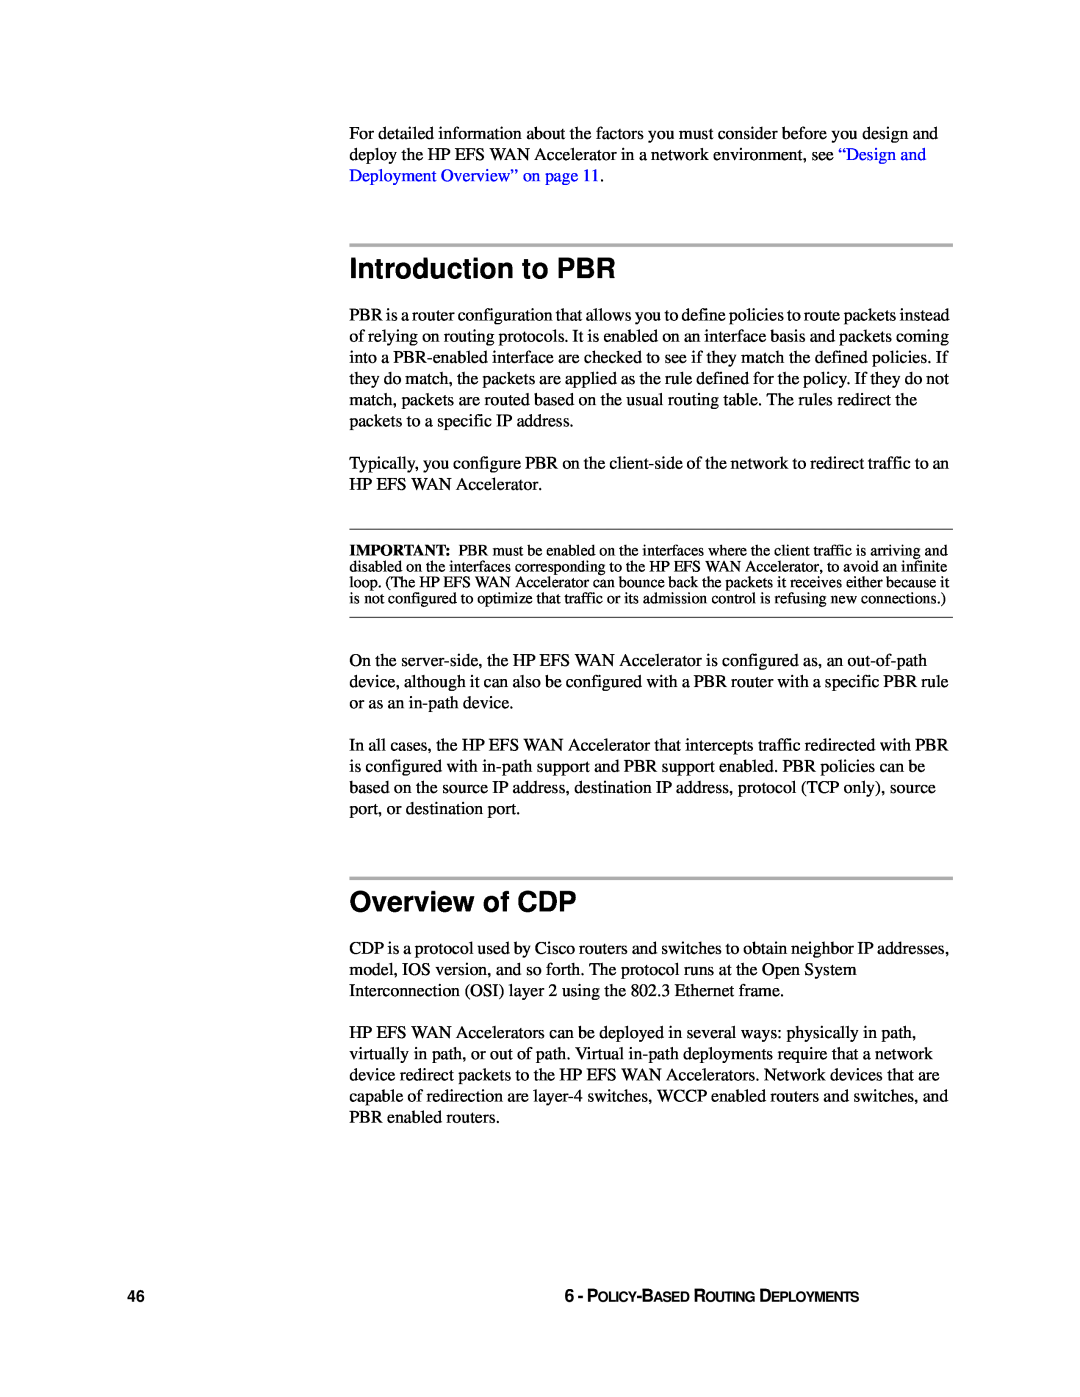 HP Enterprise File Services WAN Accelerator manual Introduction to PBR, Overview of CDP 